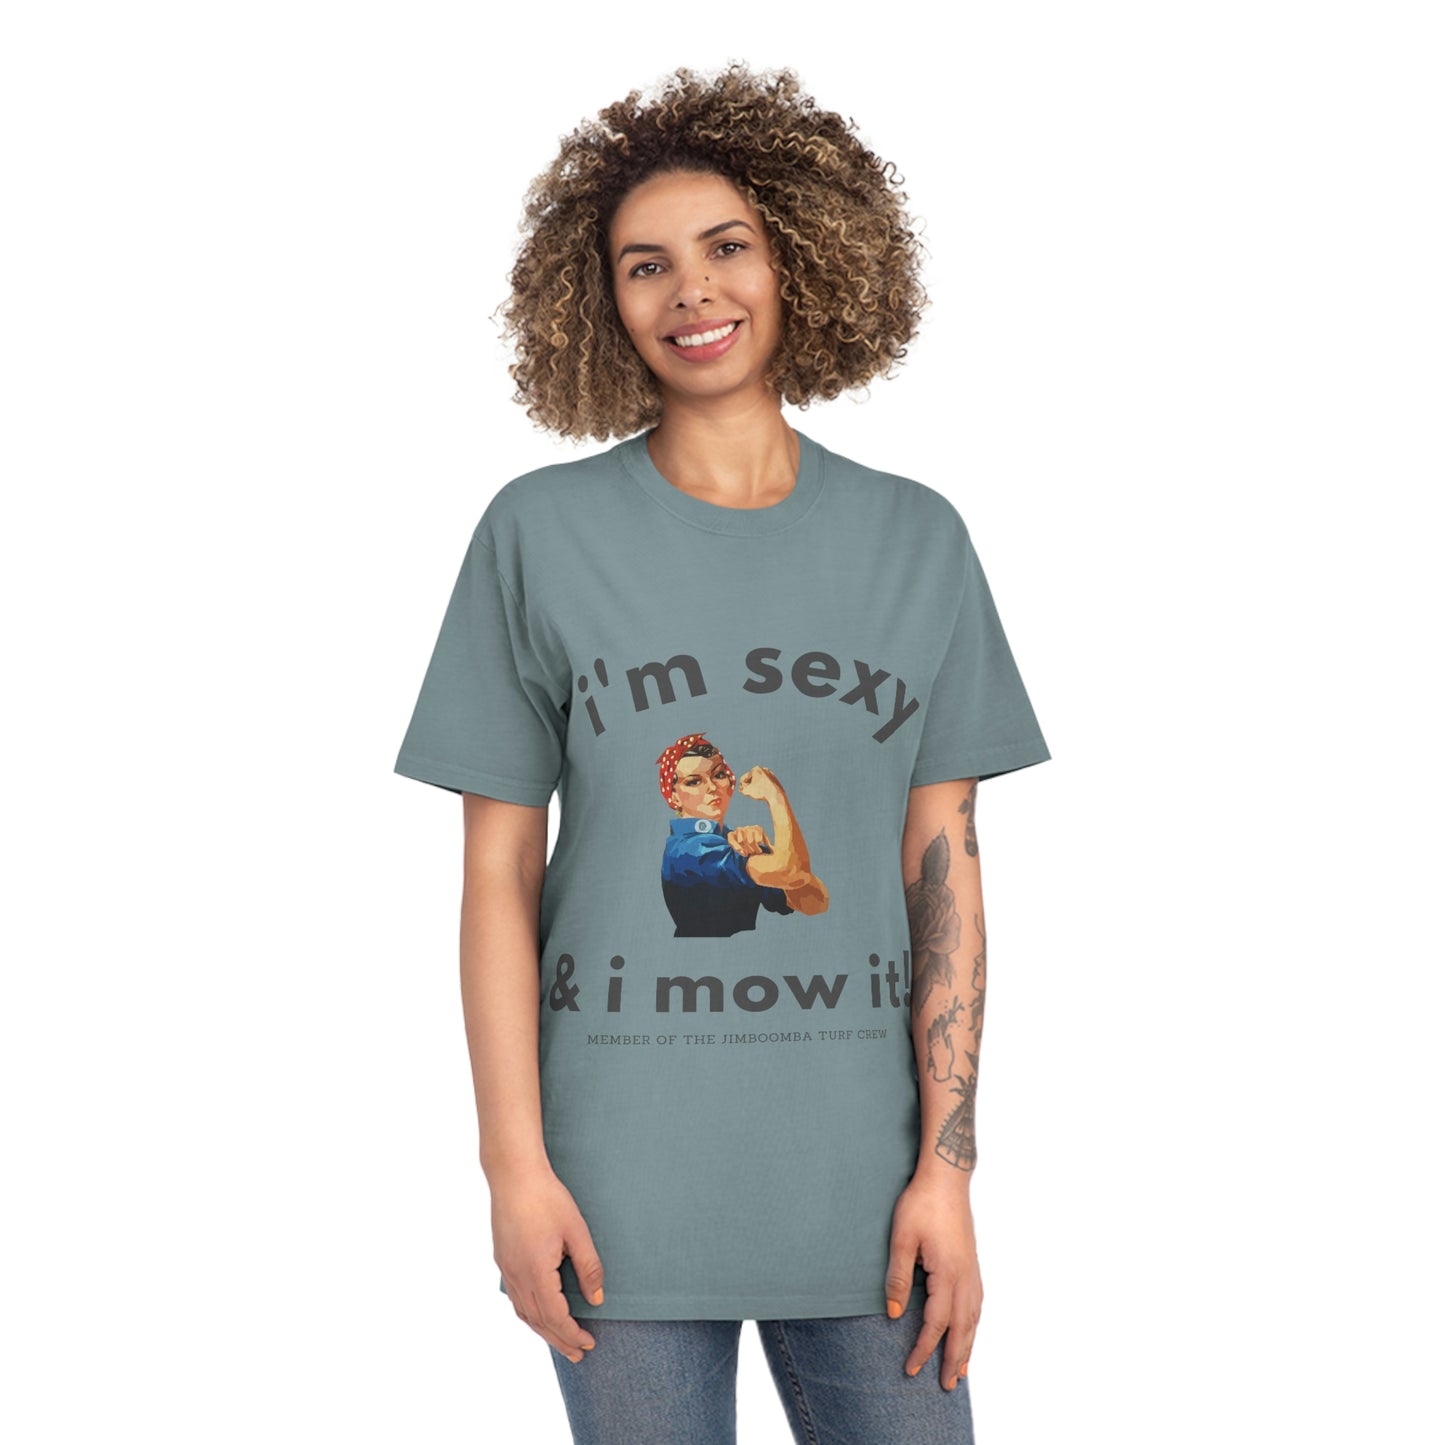 Copy of Unisex Faded Shirt - Sexy & I mow it (Female)